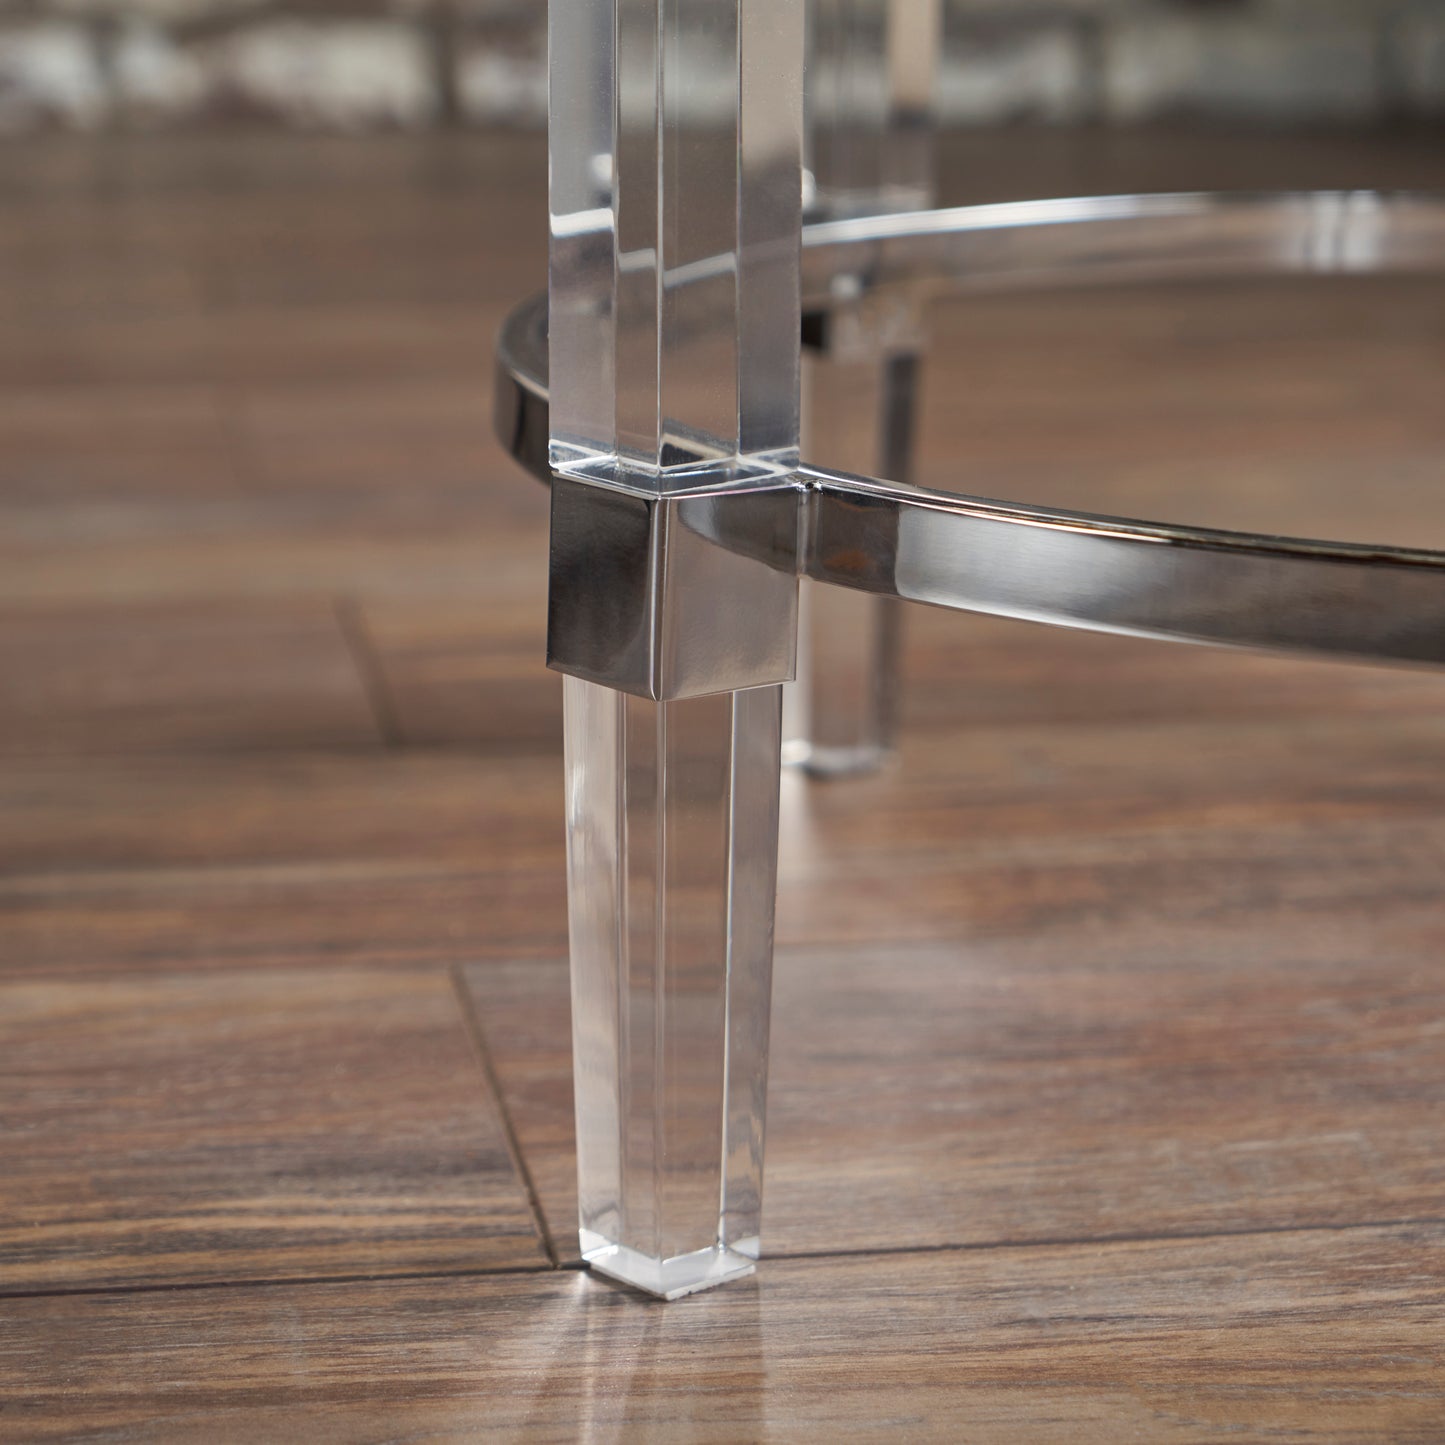 Orson See Through Clear Acrylic & Glass Round End Table